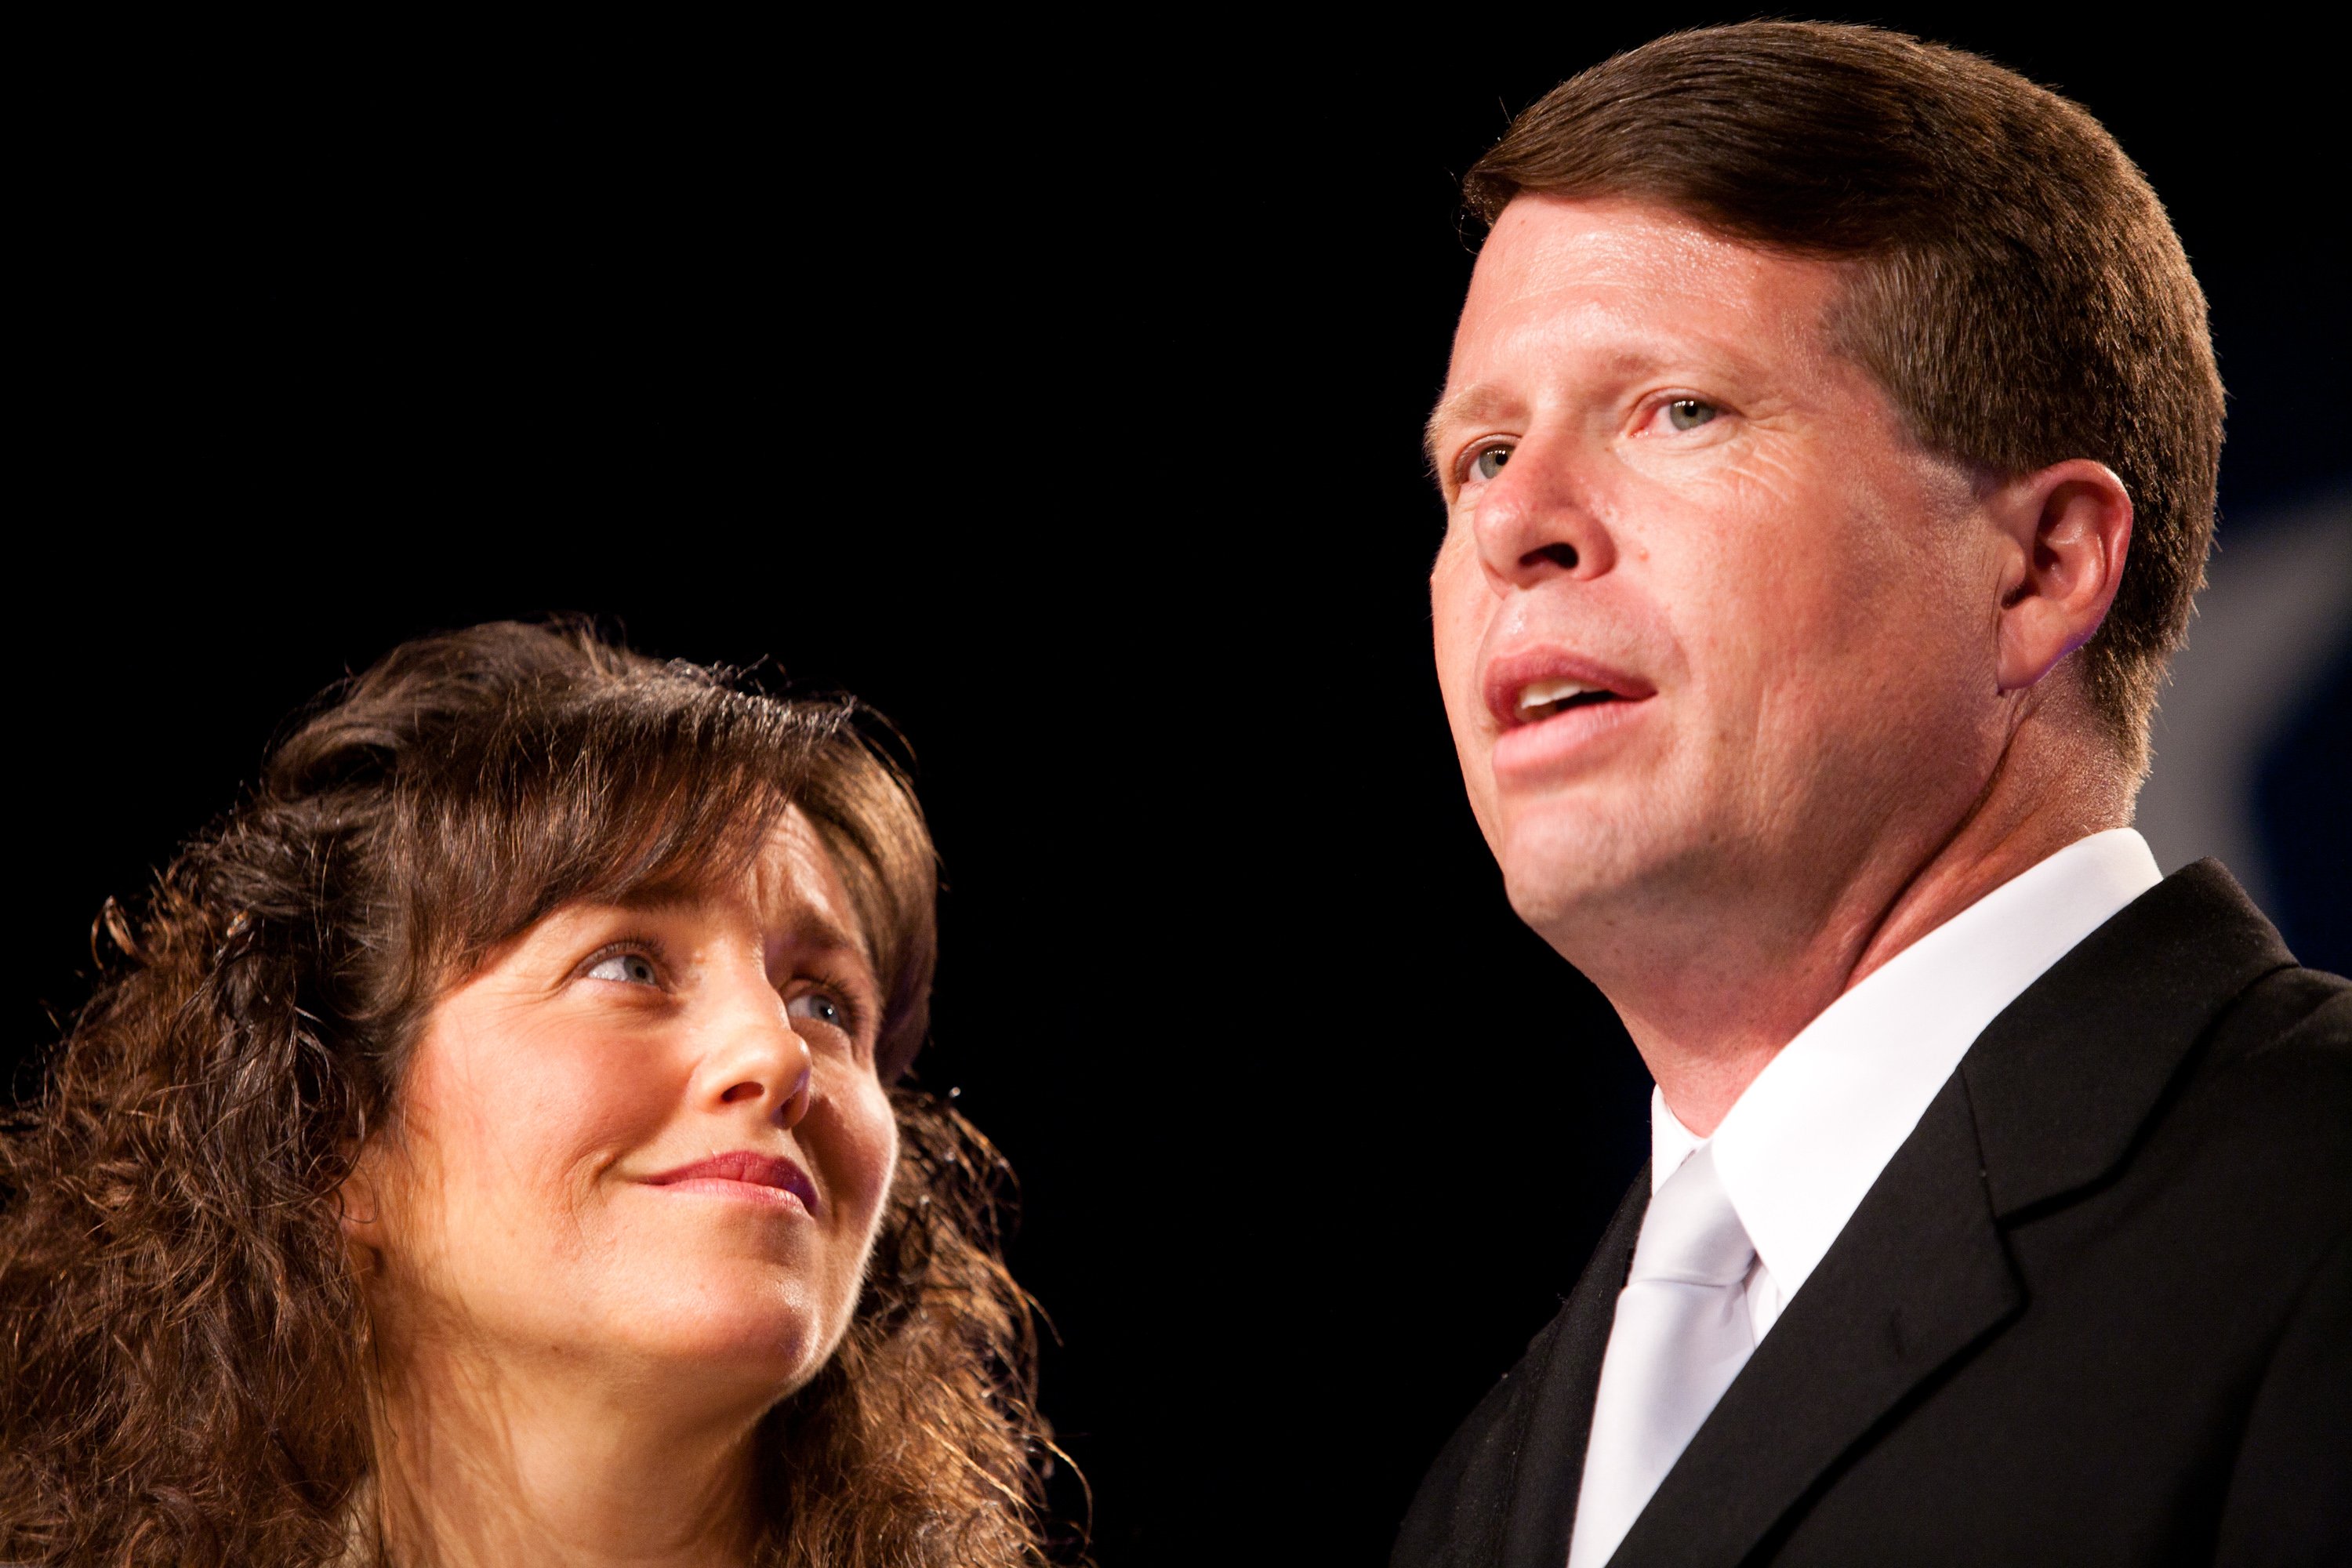 Jim Bob and Michelle Duggar at the Values Voter Summit | Photo: Getty Images